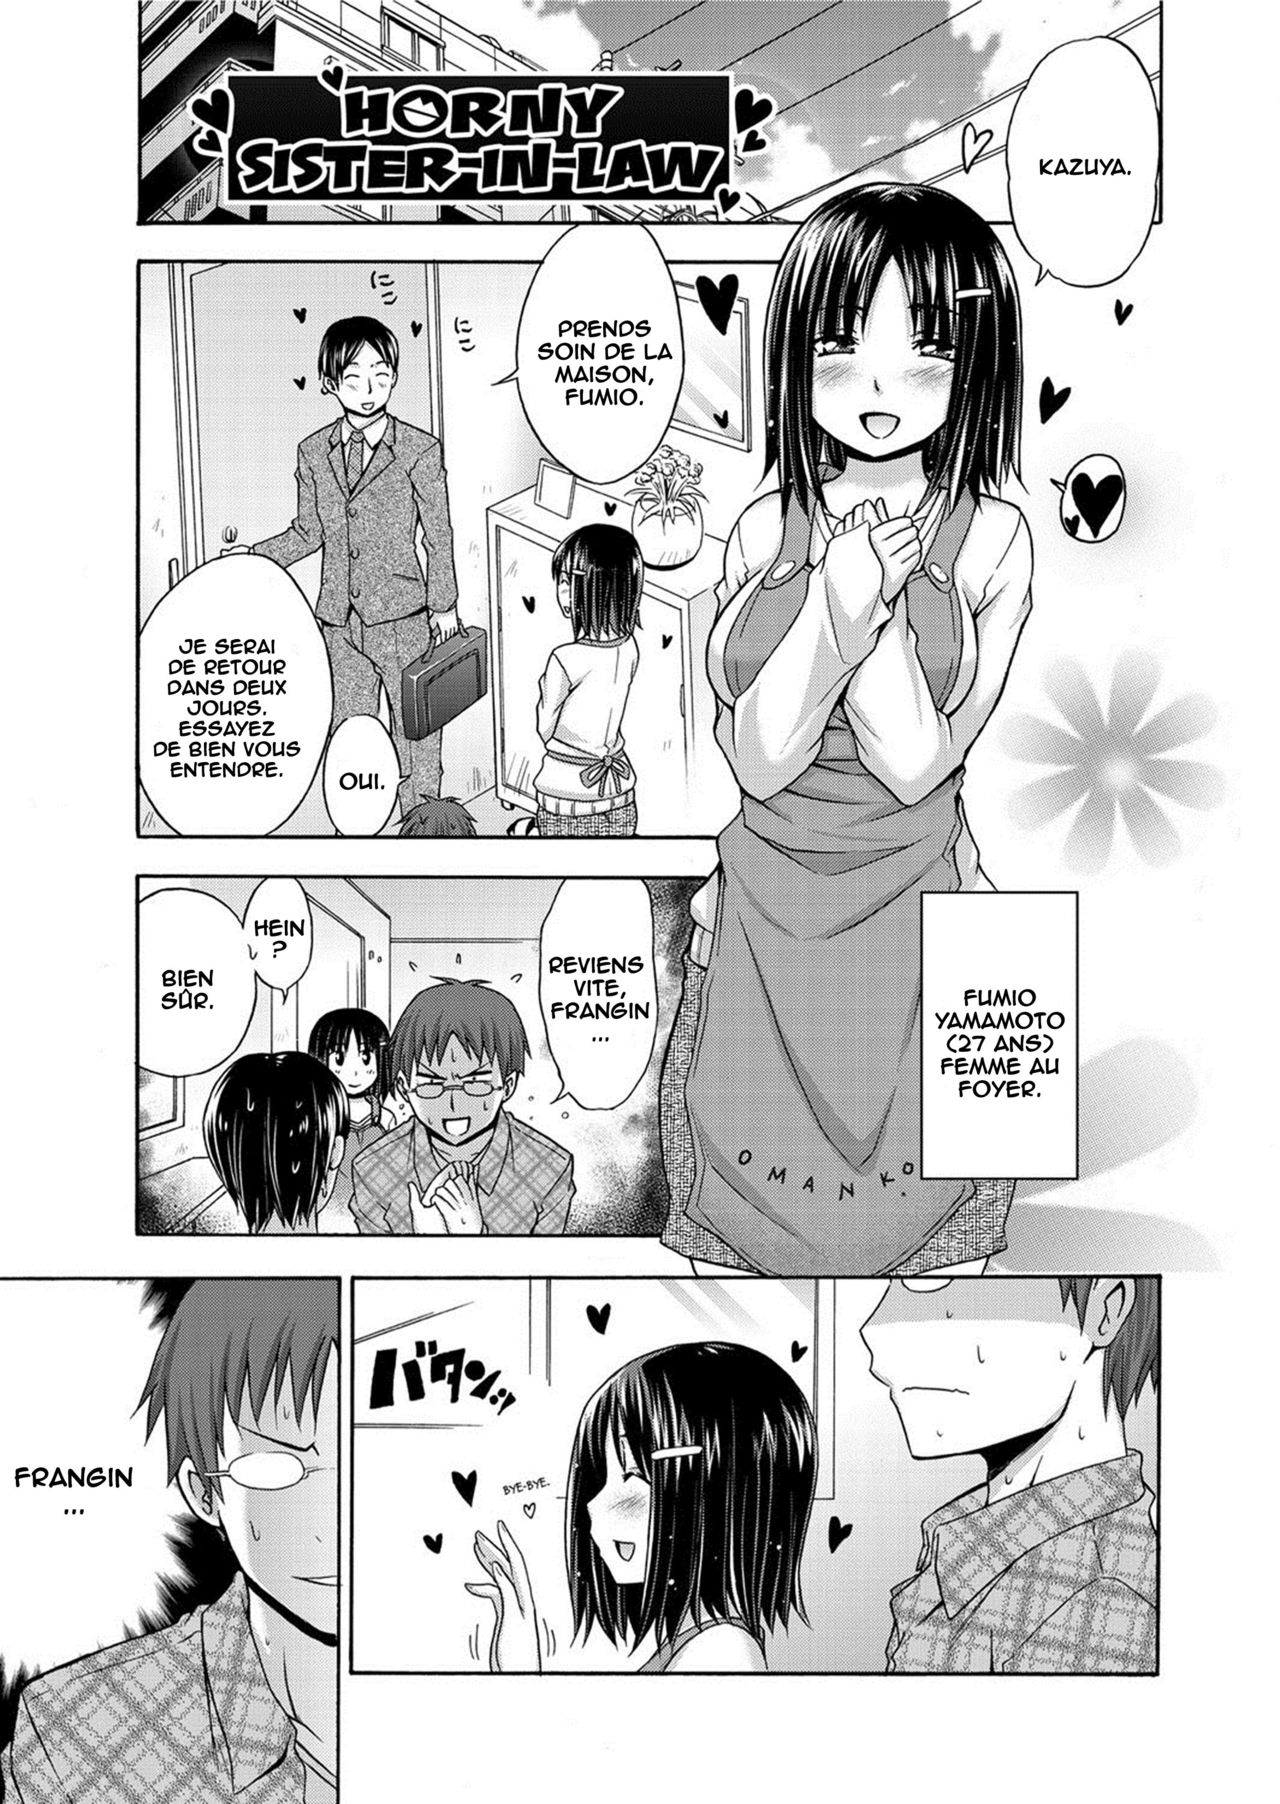 Hatsujou Aniyome  Horny Sister-in-law